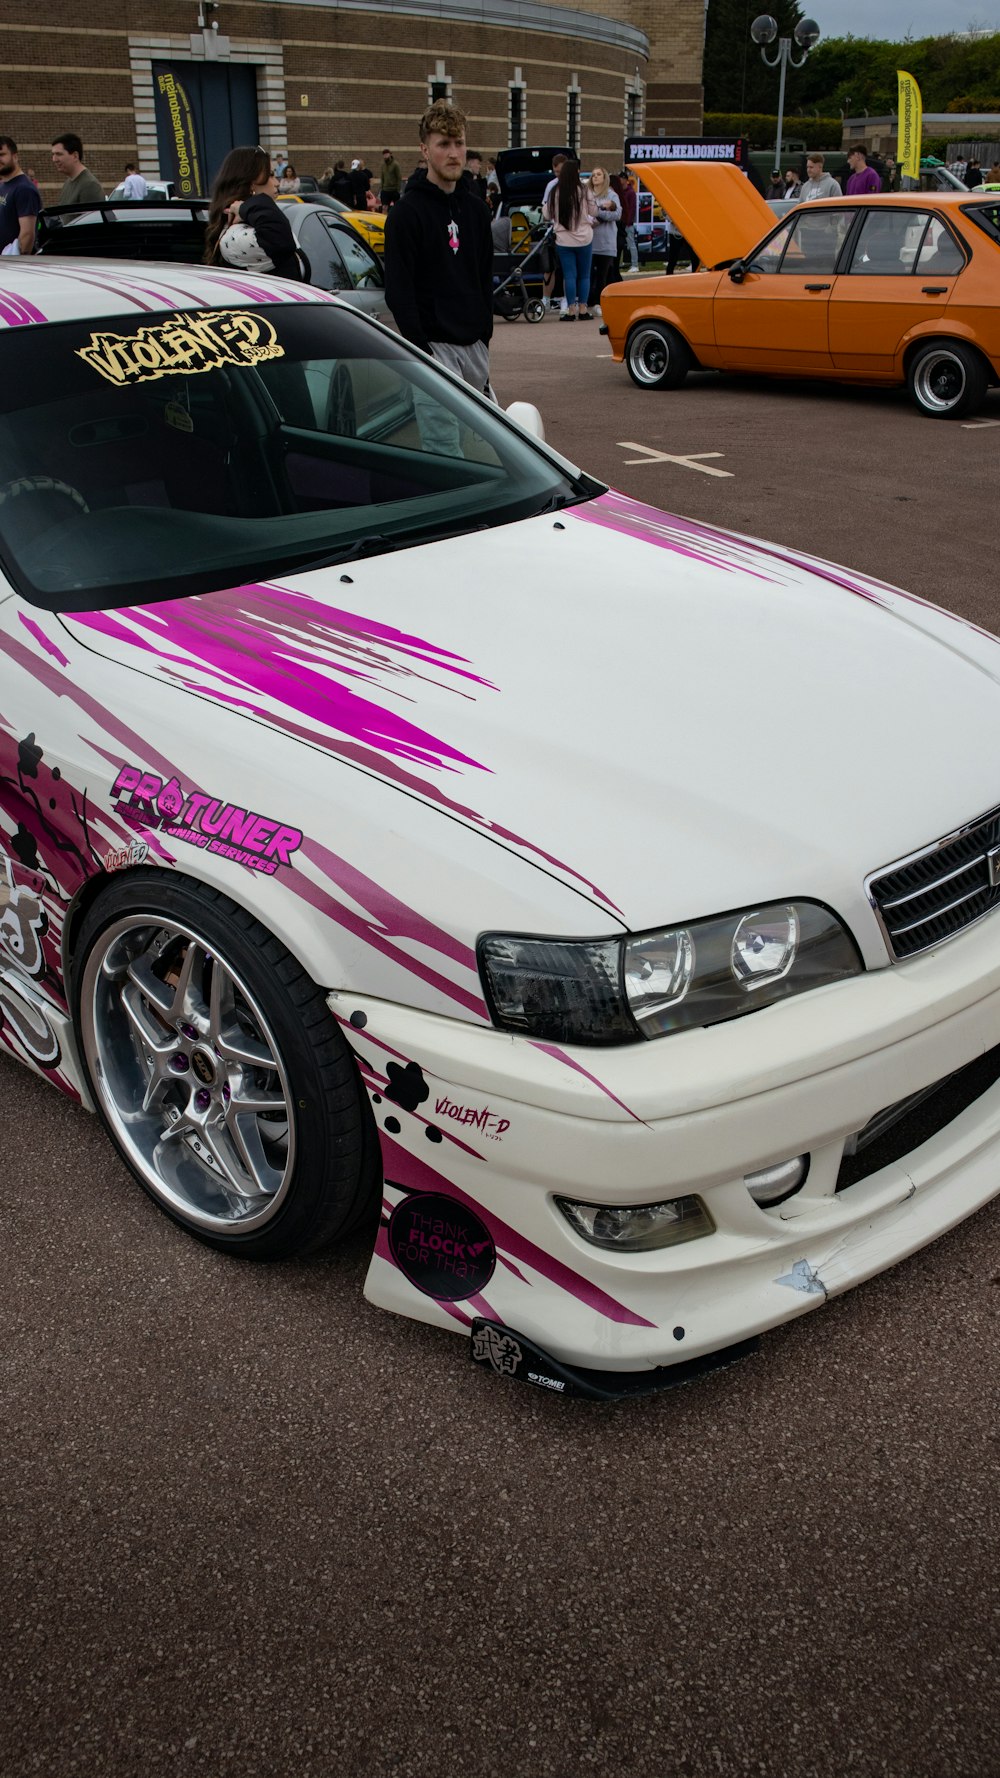 a white car with a pink and purple paint job parked in a parking lot